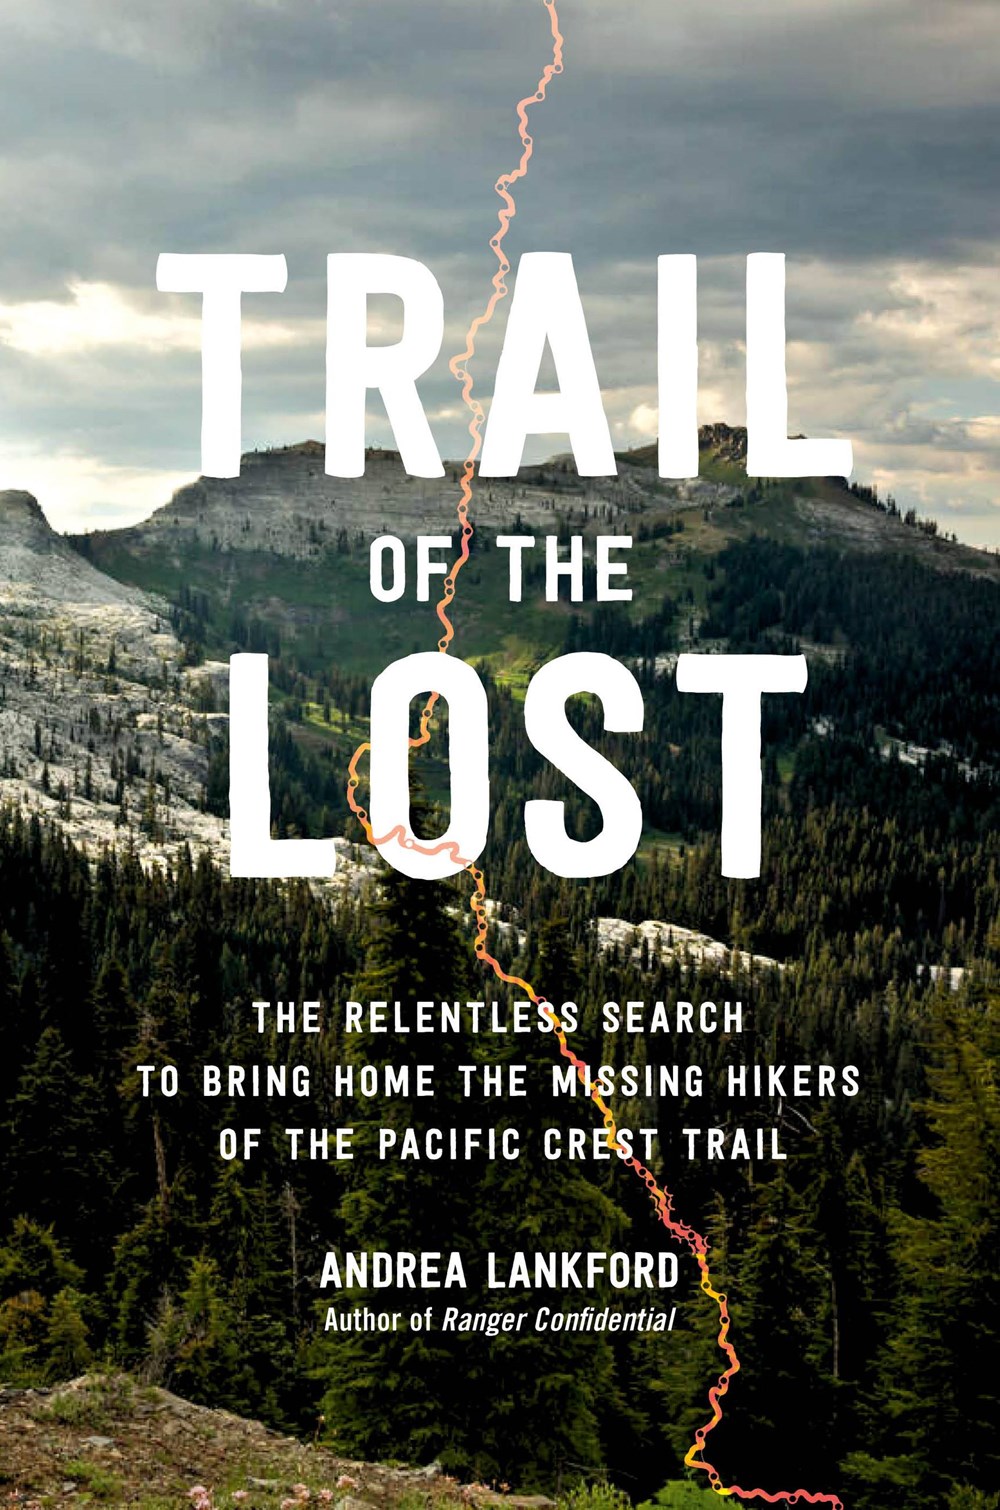 Nonfiction Book Review: Trail of the Lost by Andrea Lankford